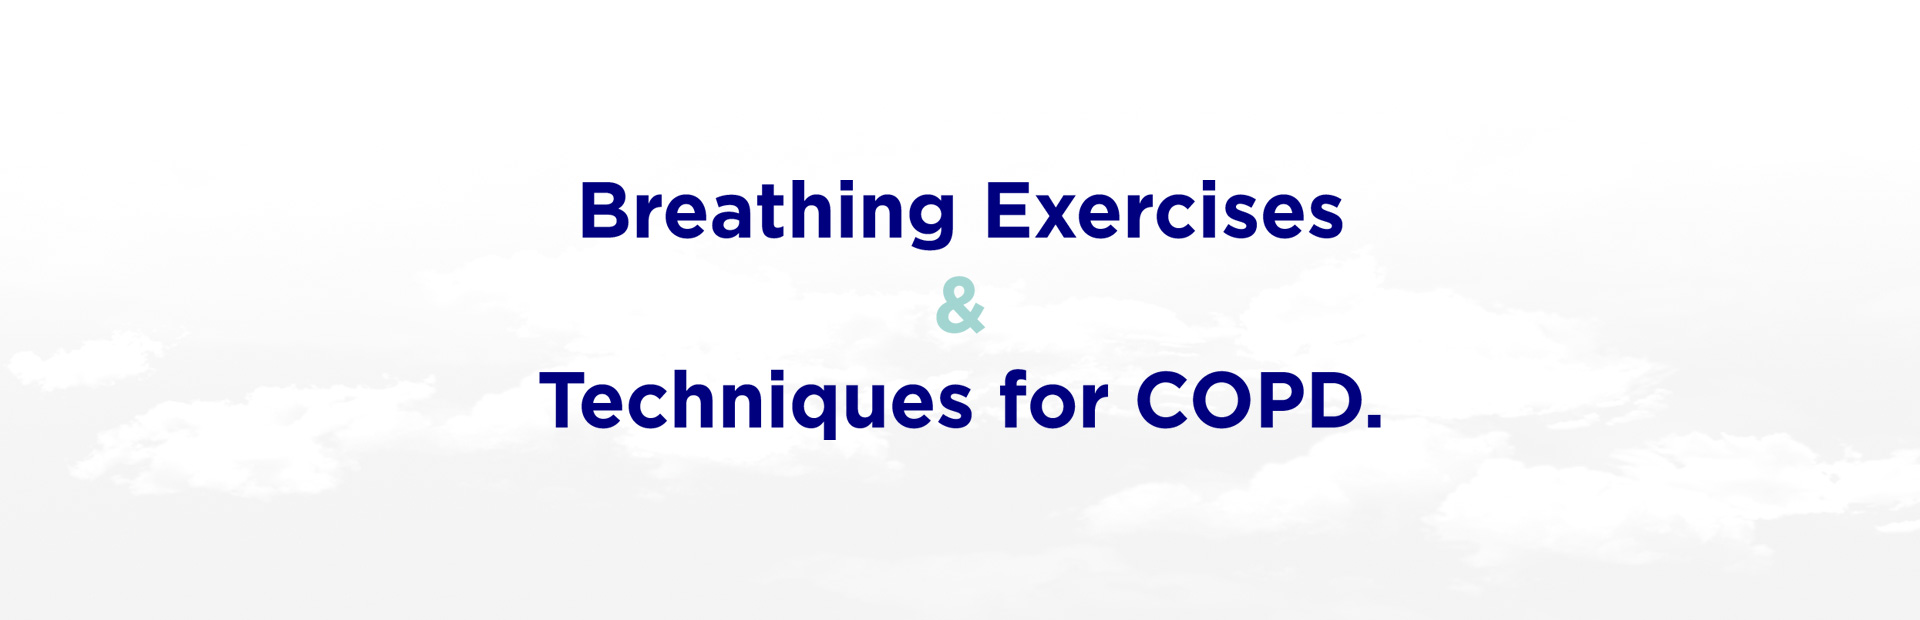 Breathing Exercises & Techniques for COPD